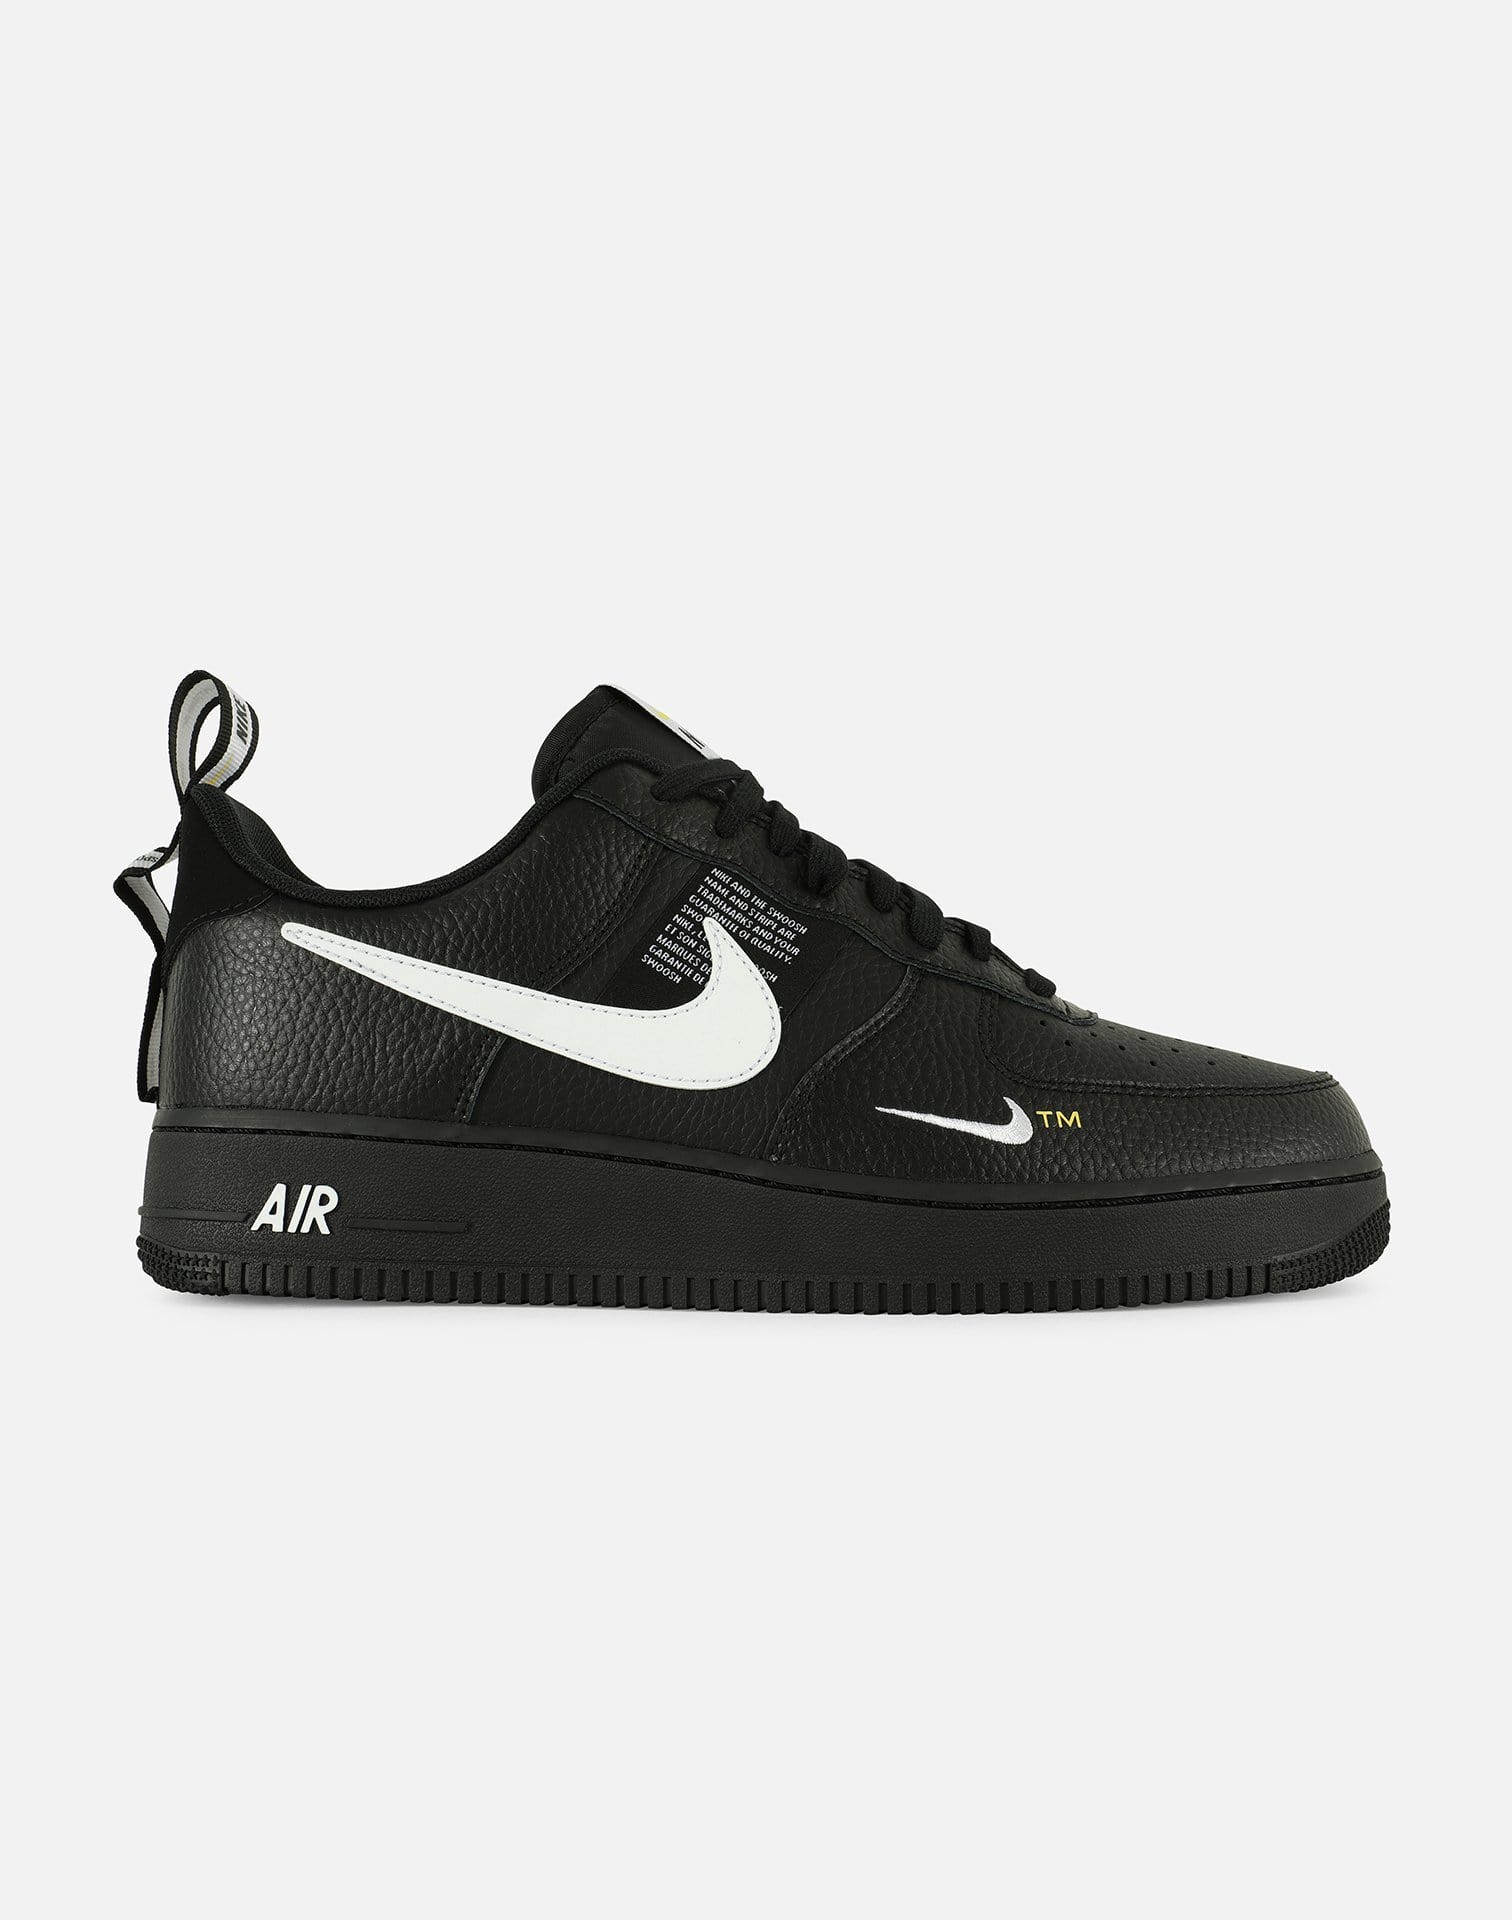 Nike AIR FORCE 1 LOW '07 LV8 UTILITY